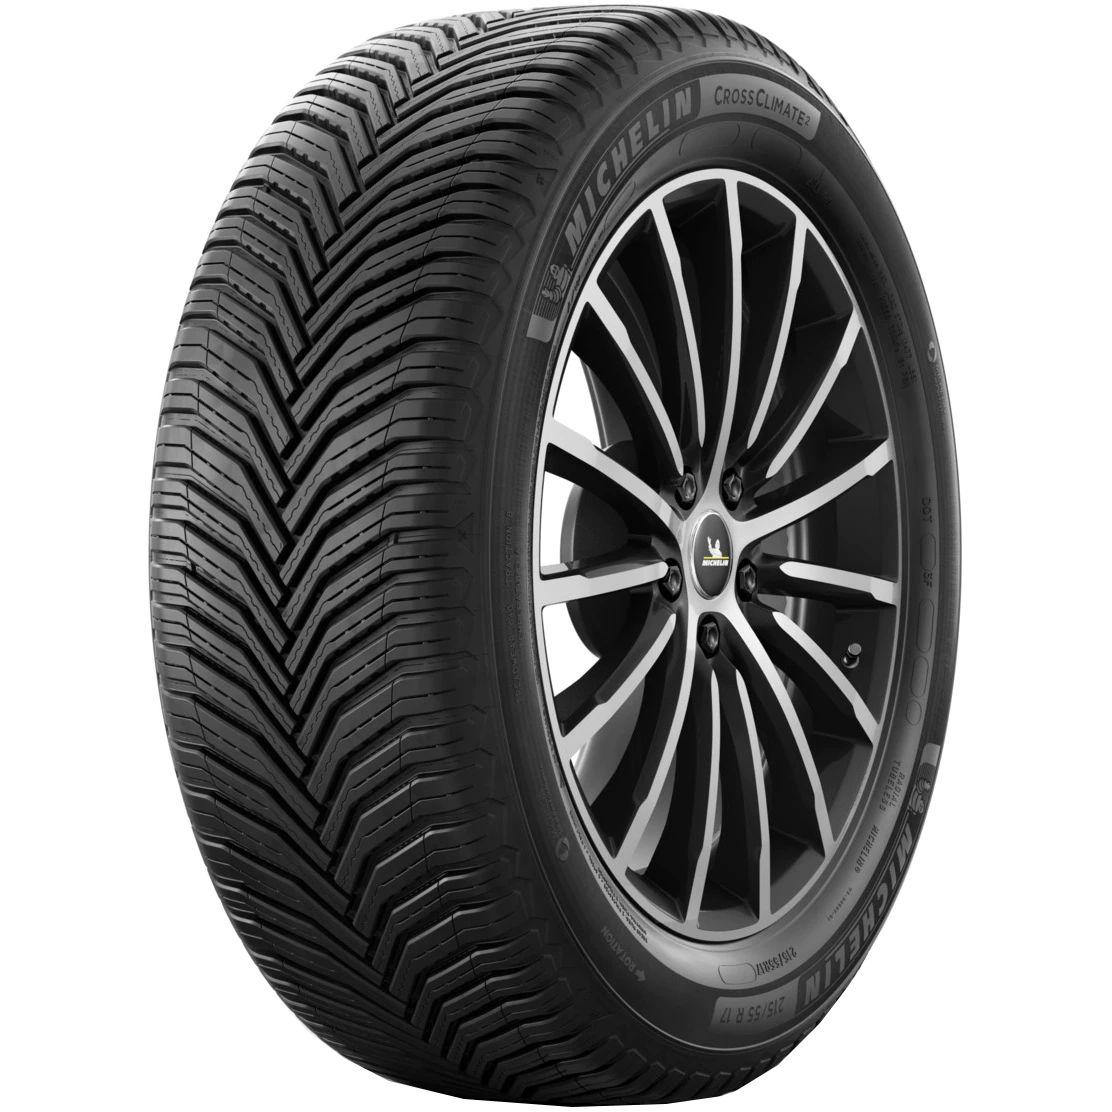 Anvelope all seasons MICHELIN CrossClimate2 M+S 215/65 R16 98H